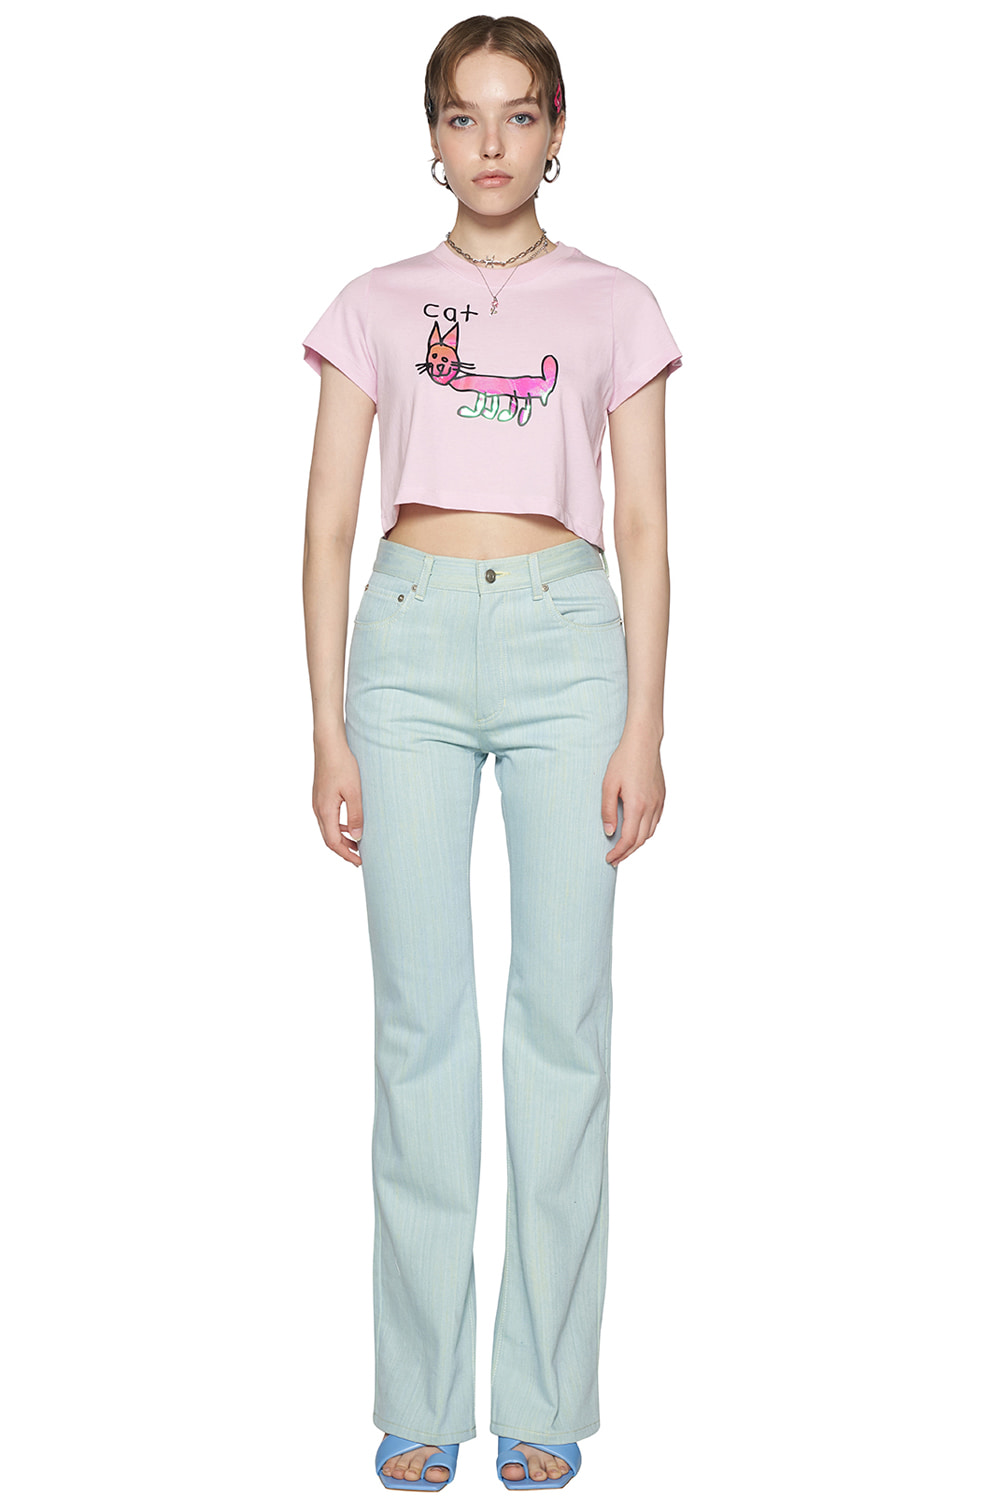 PINK REFLECTIVE CAT CROPPED T-SHIRT